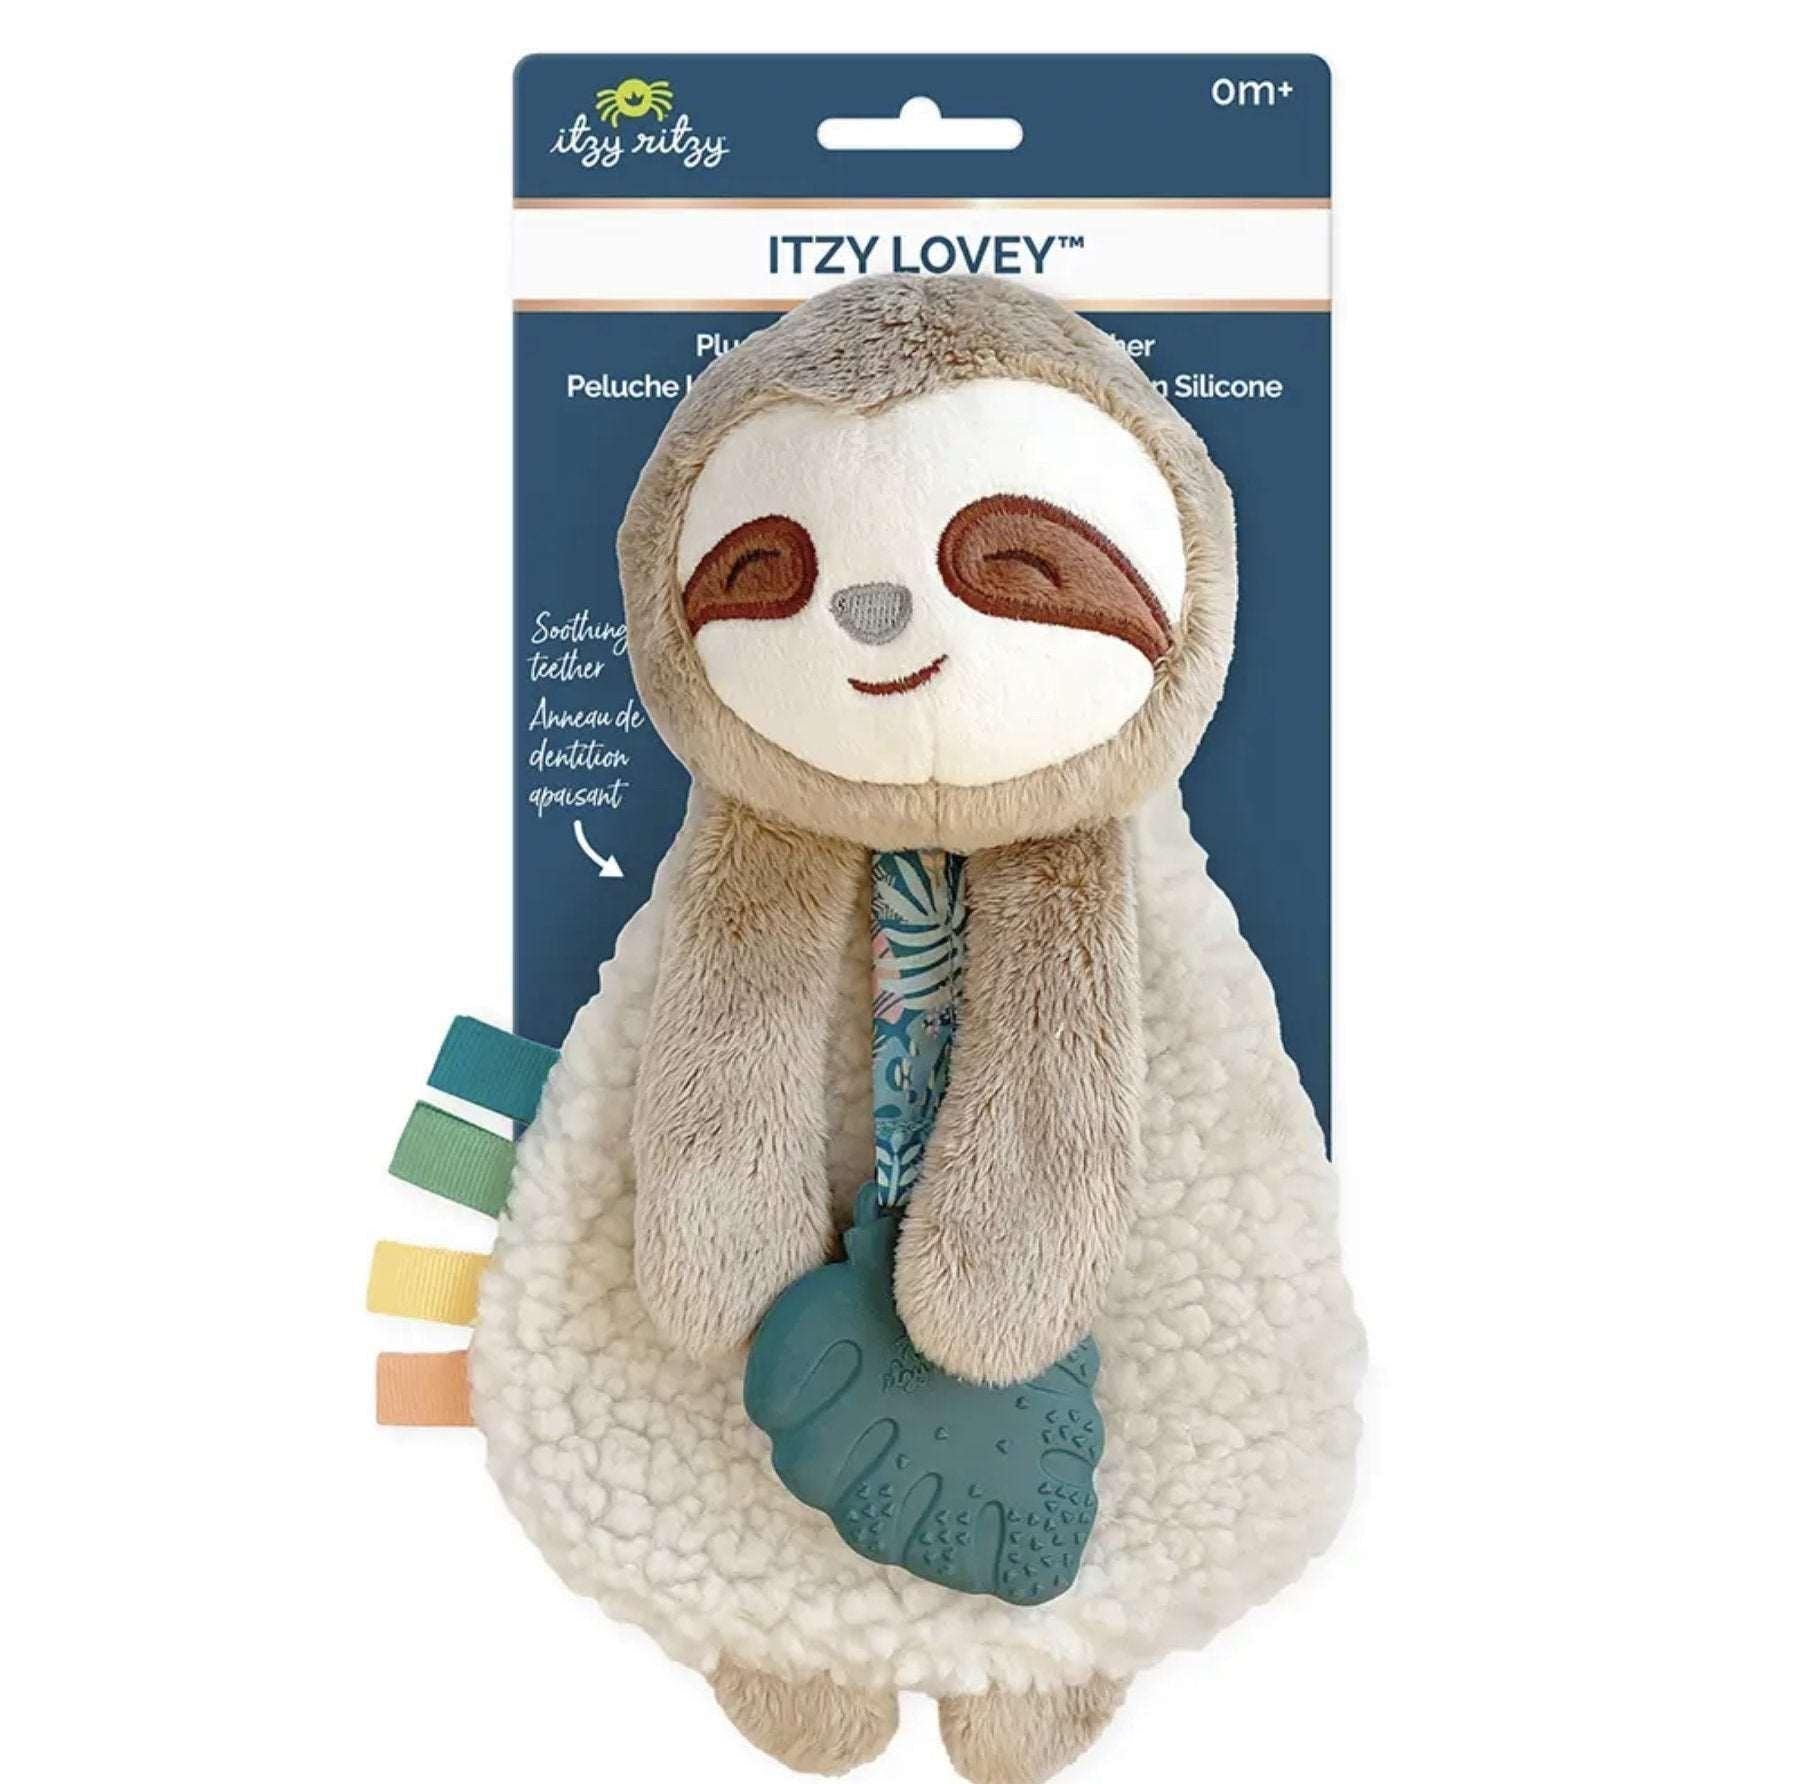 Itzy Lovey™ Sloth Plush with Silicone Teether Baby in Styles